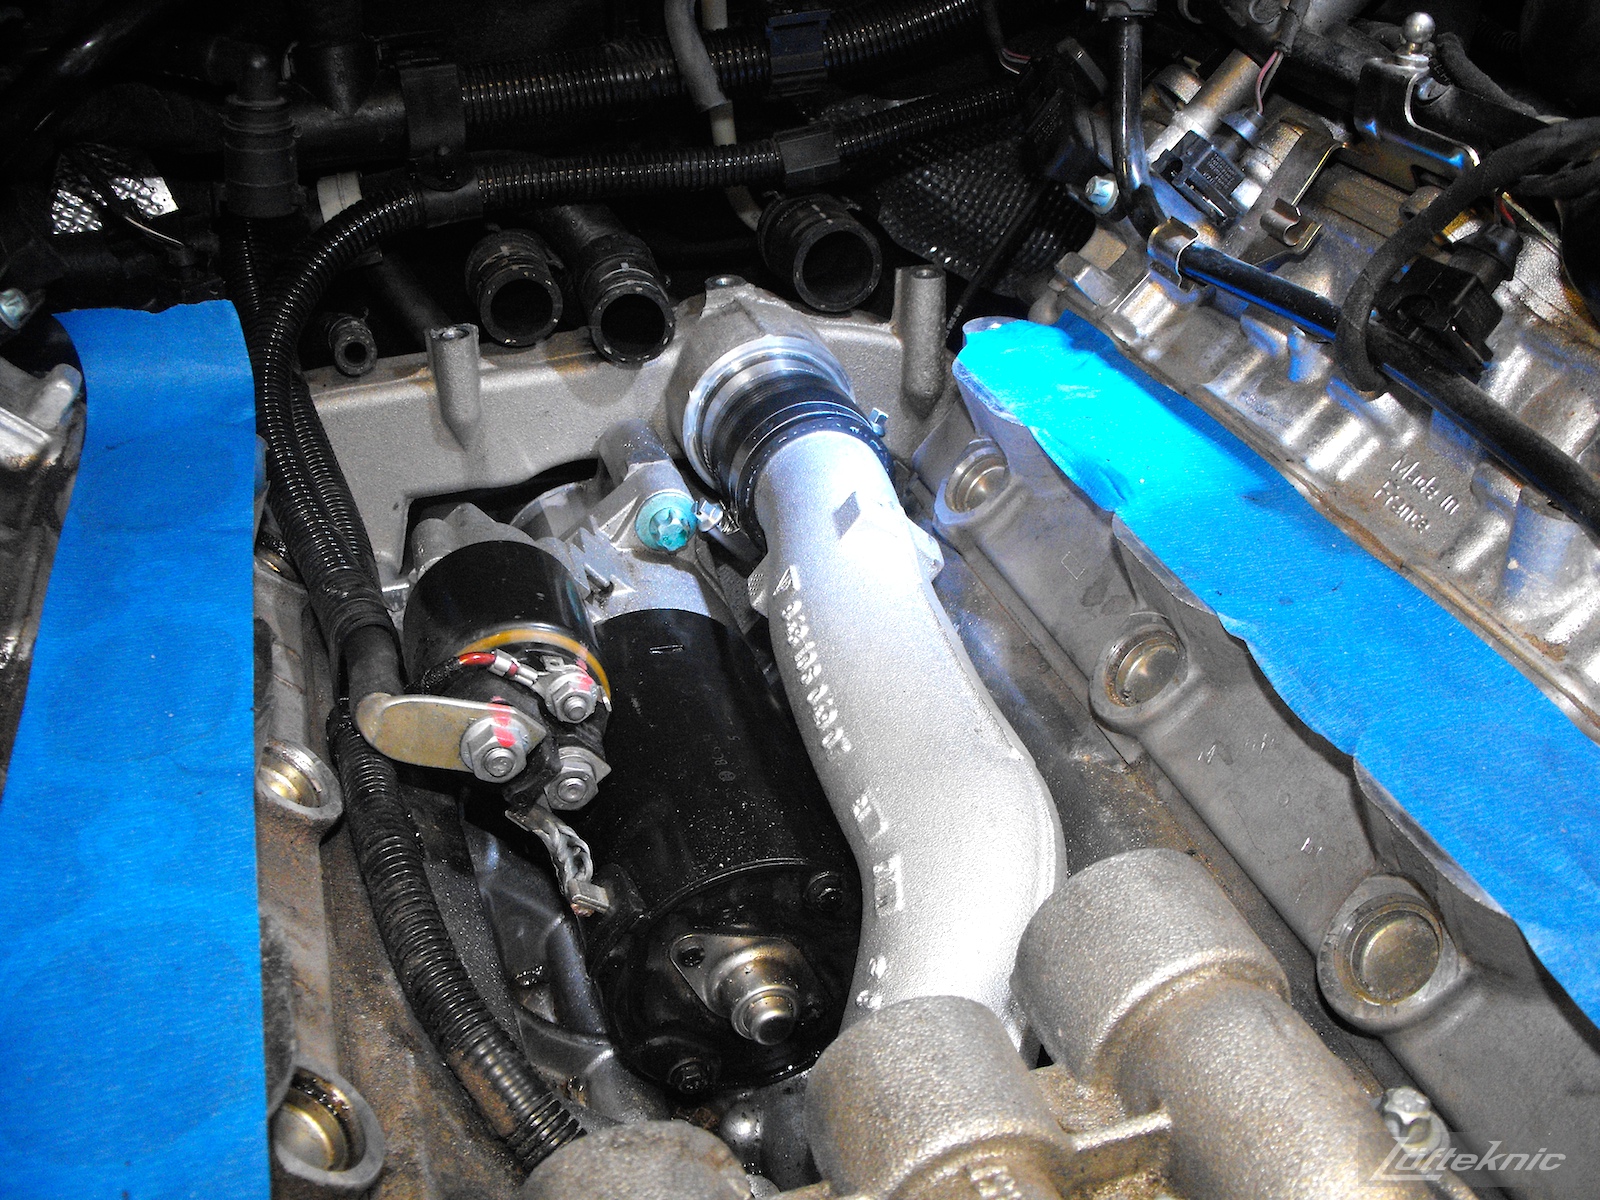 The Porsche updated coolant pipe kit installed on a 4.5 Cayenne V8.